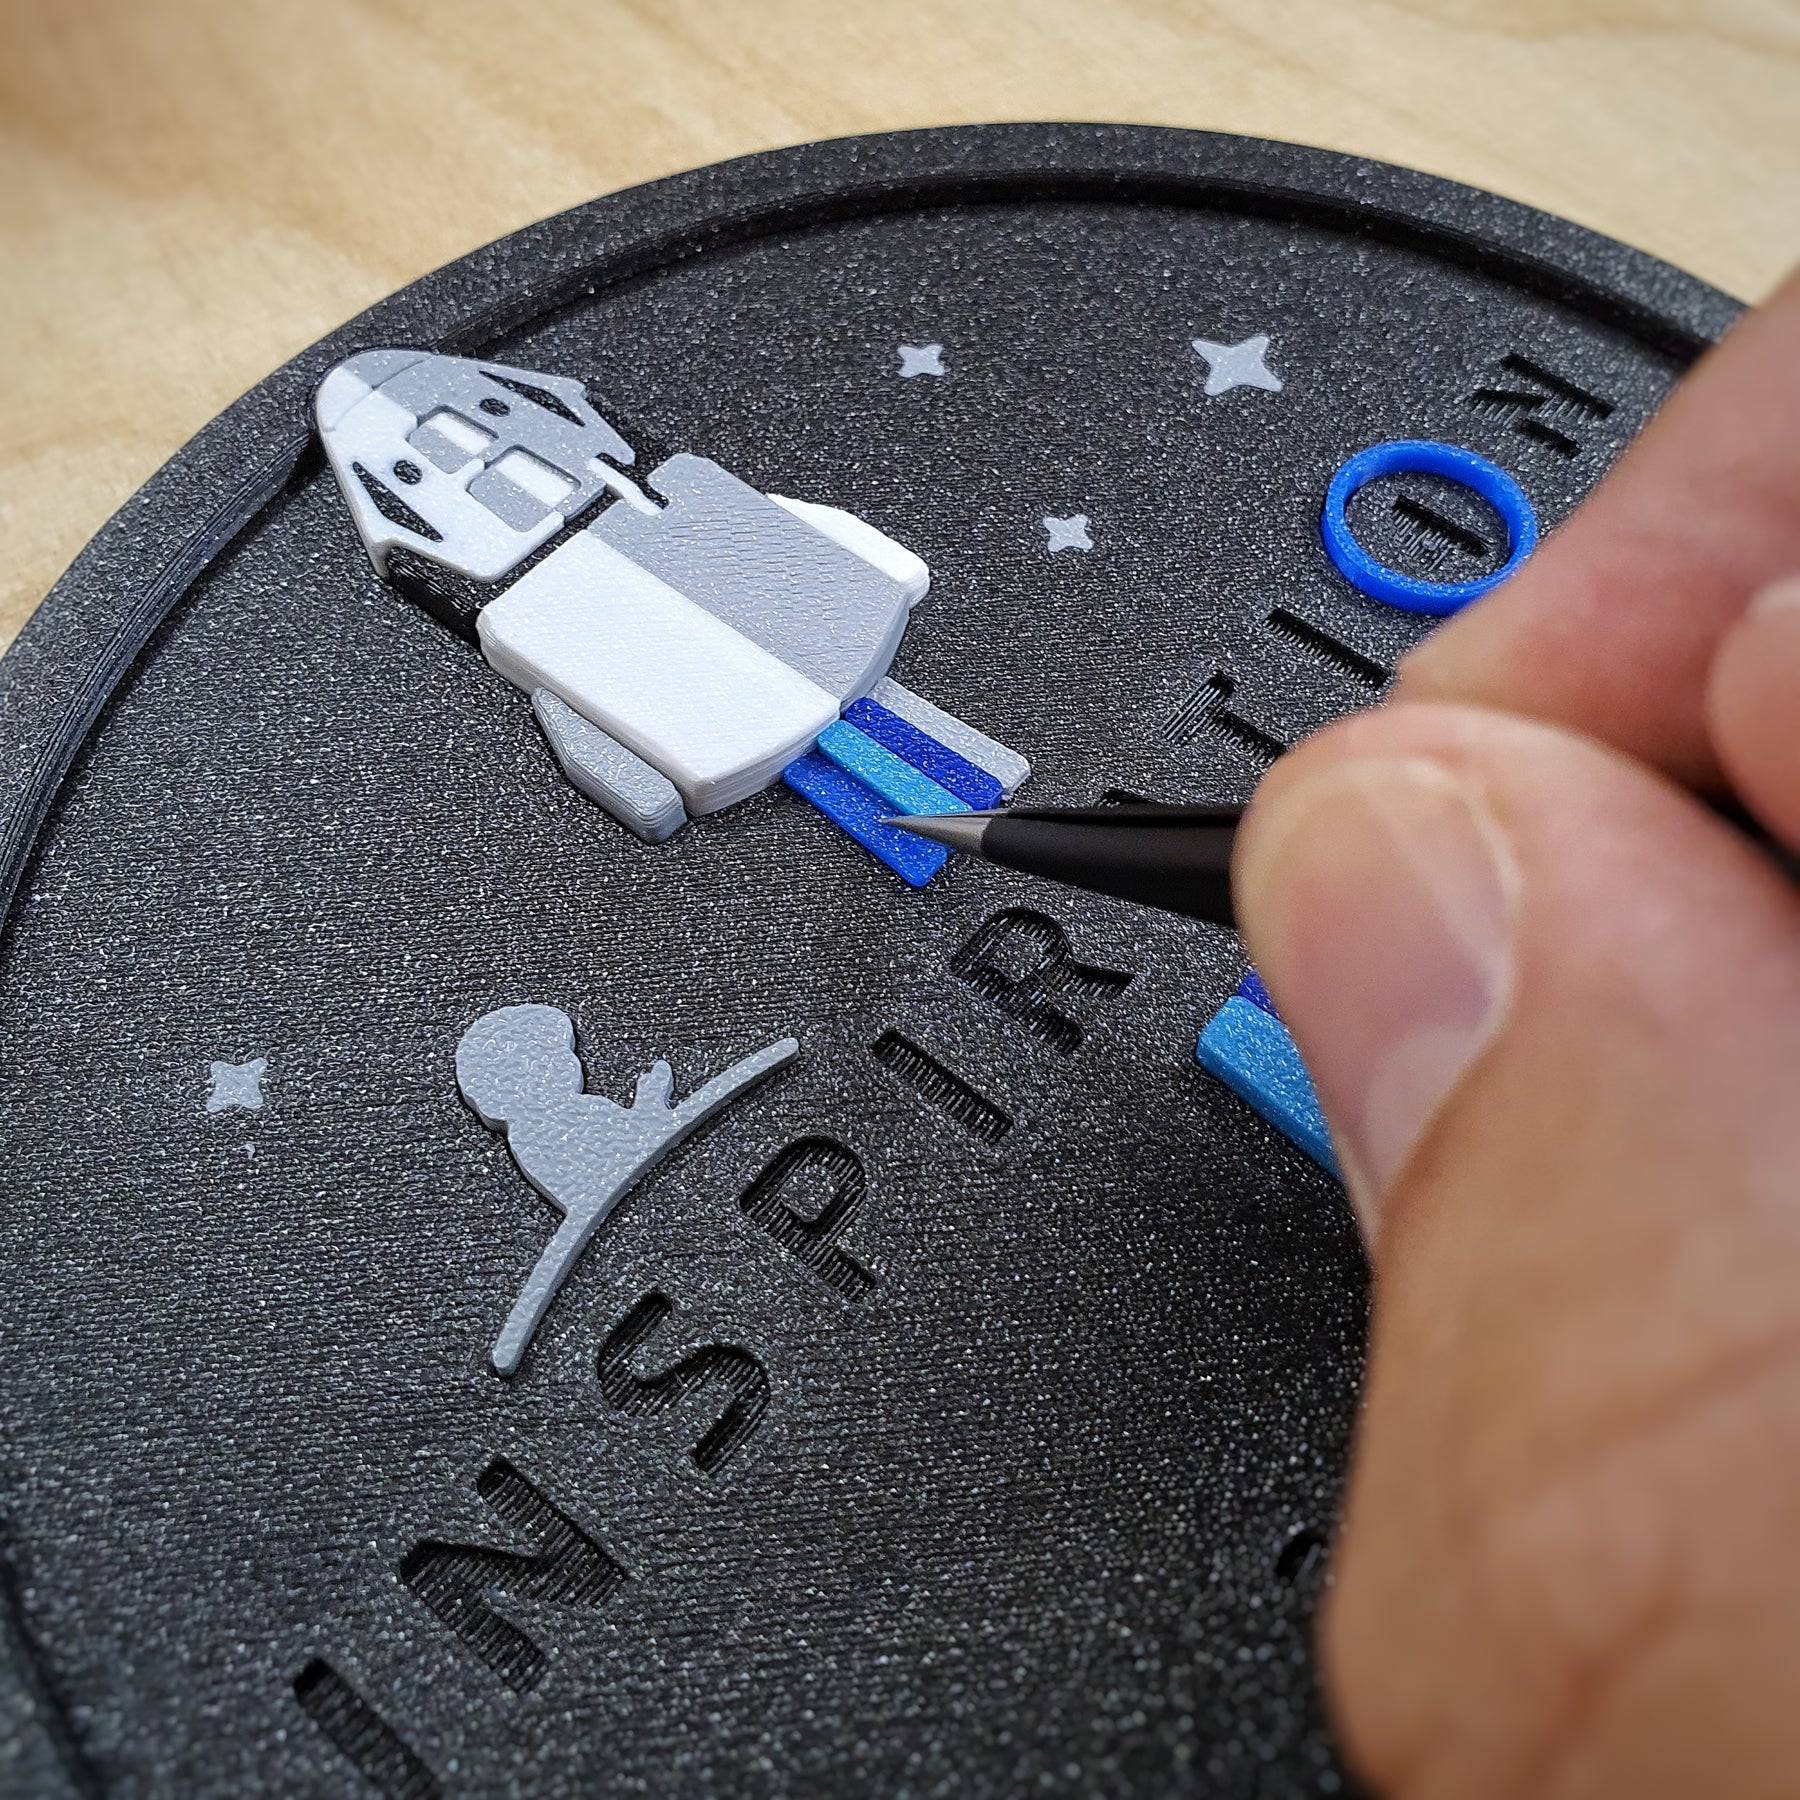 SpaceX – Inspiration 4 Patch